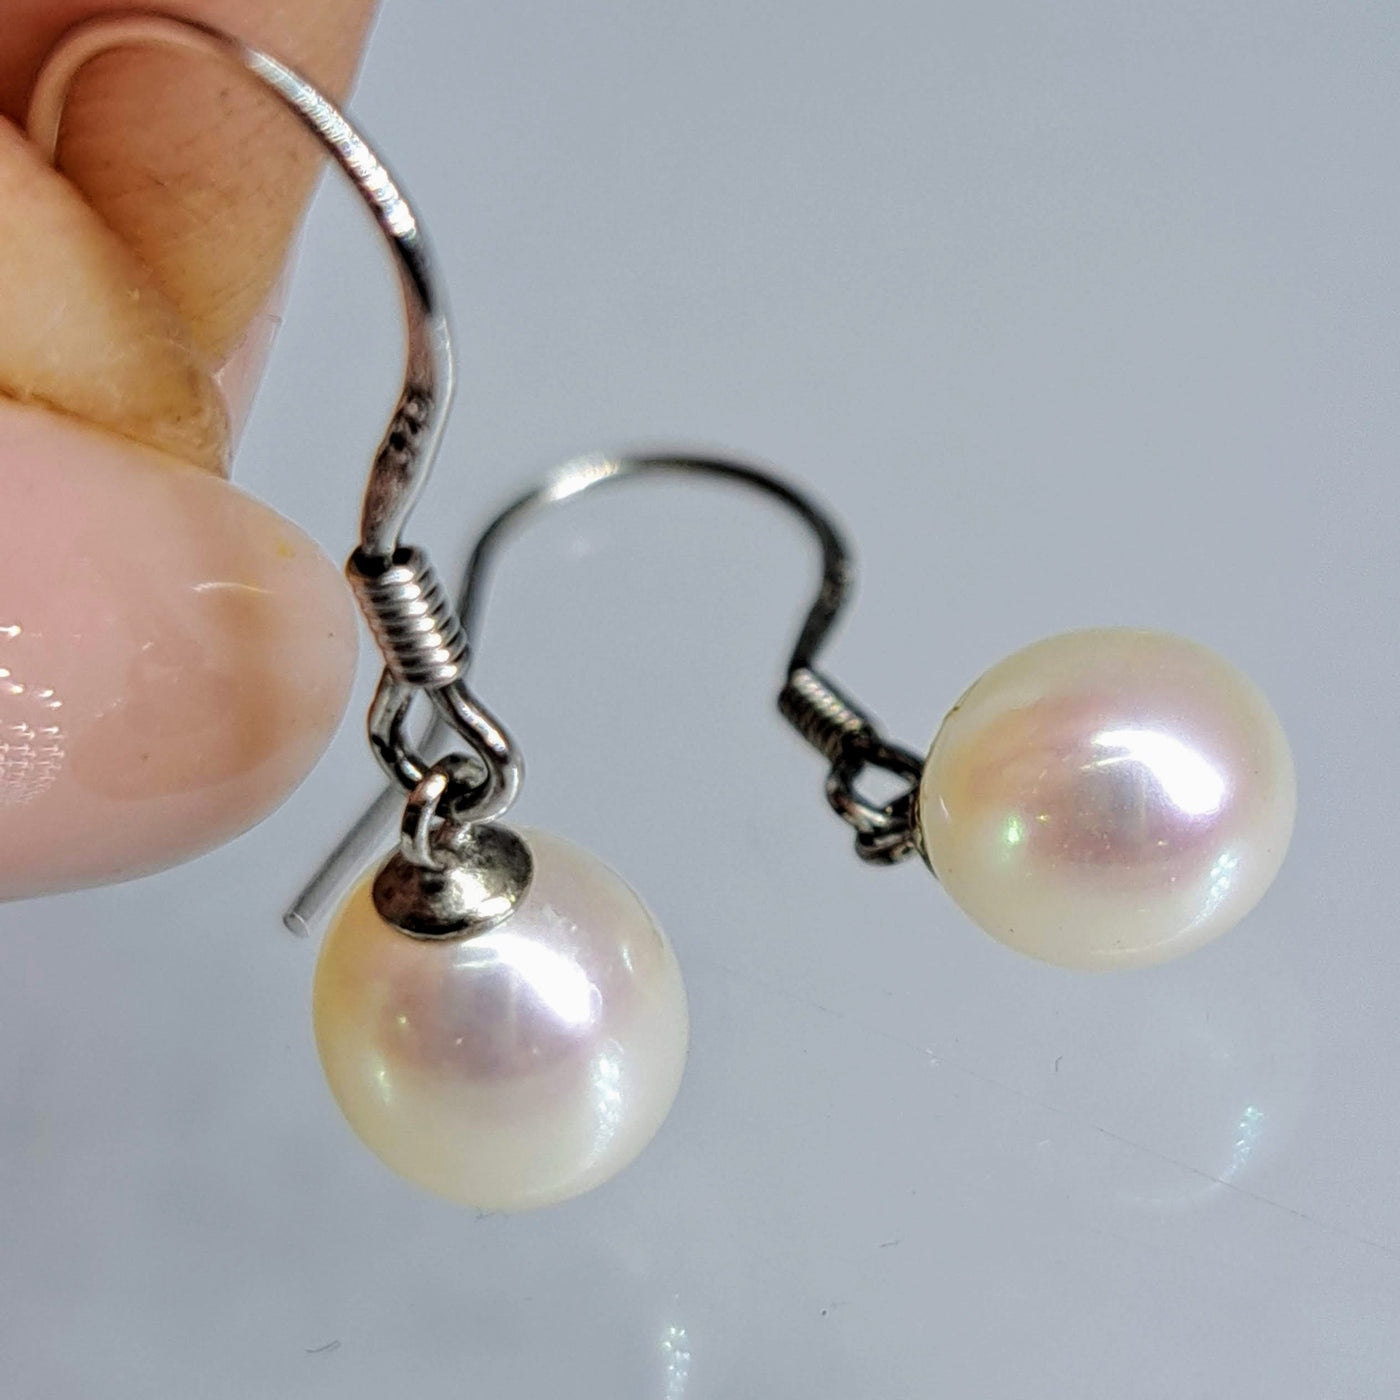 "Petite Pearl Drops" Appx. 1" or .75" Earrings - Pink, White, Or Peacock Pearls, Sterling